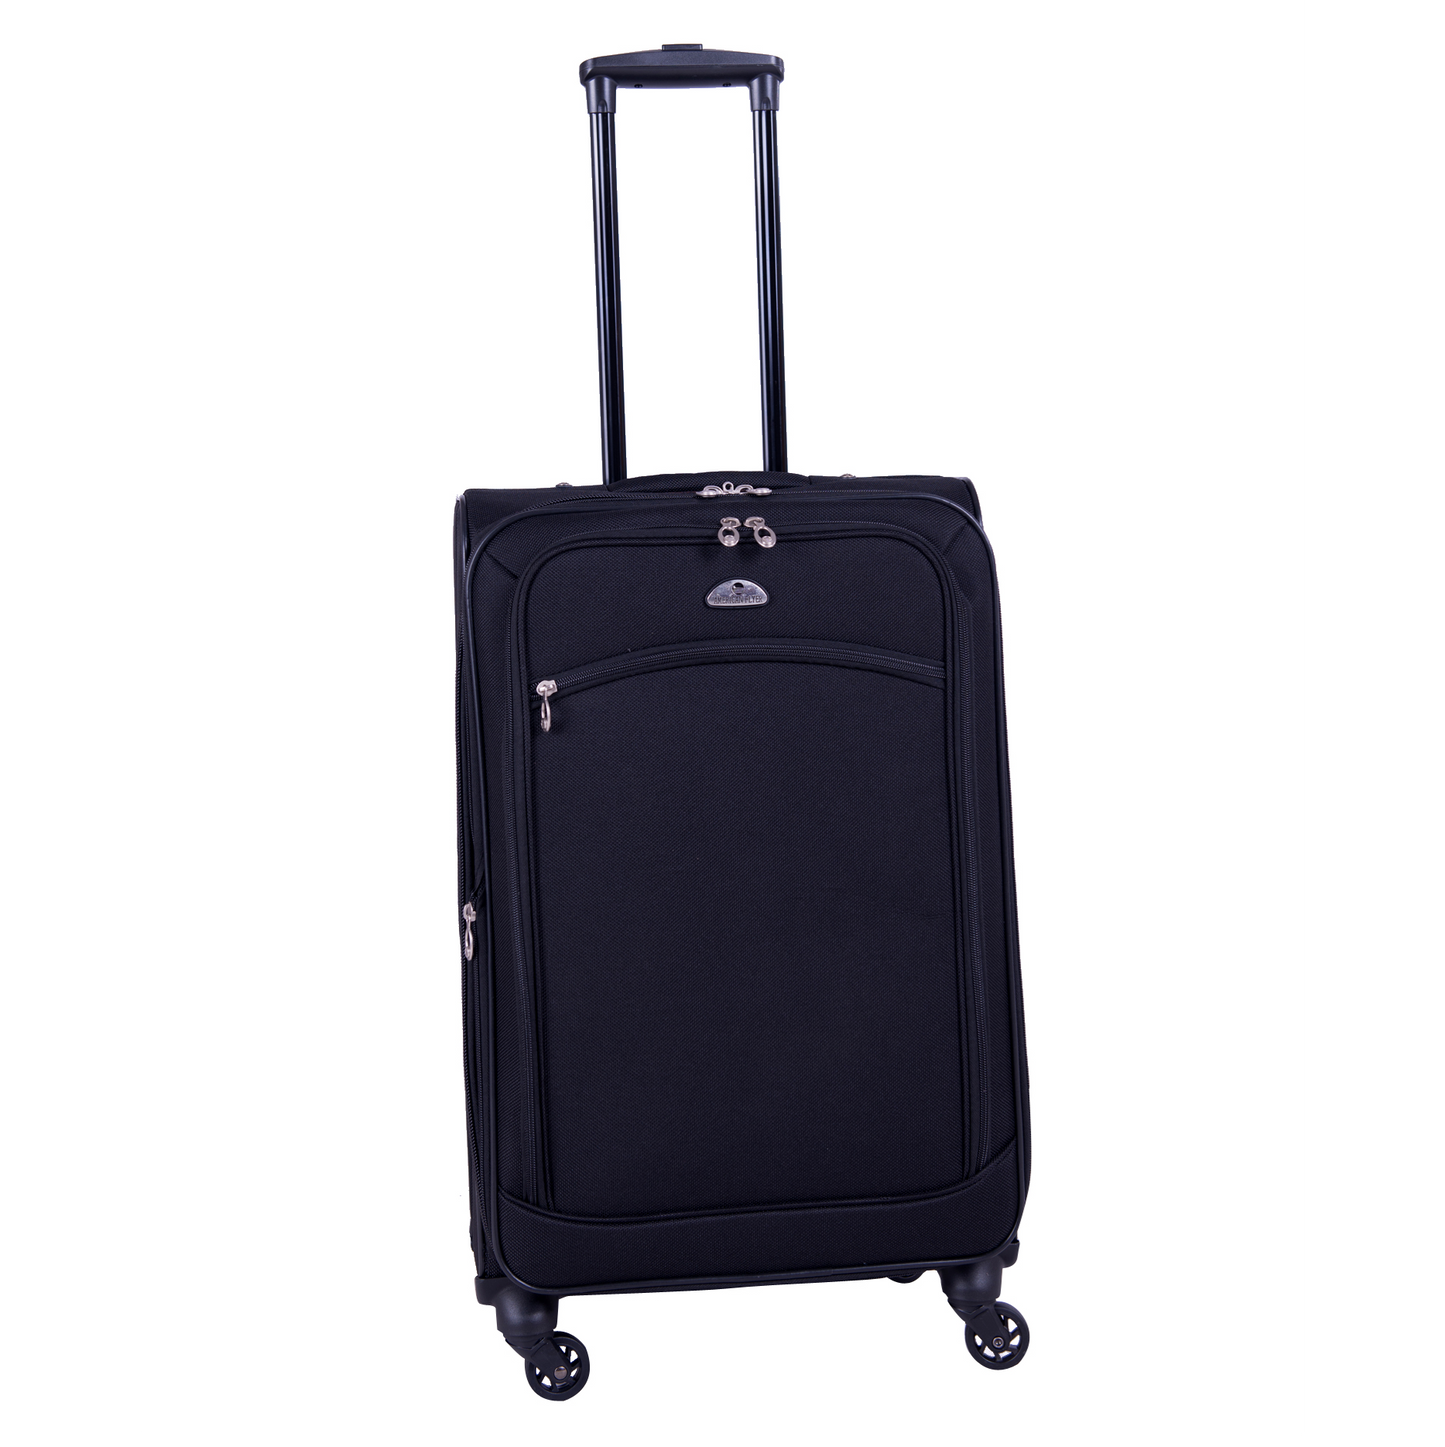 American Flyer South West 25" Spinner Luggage